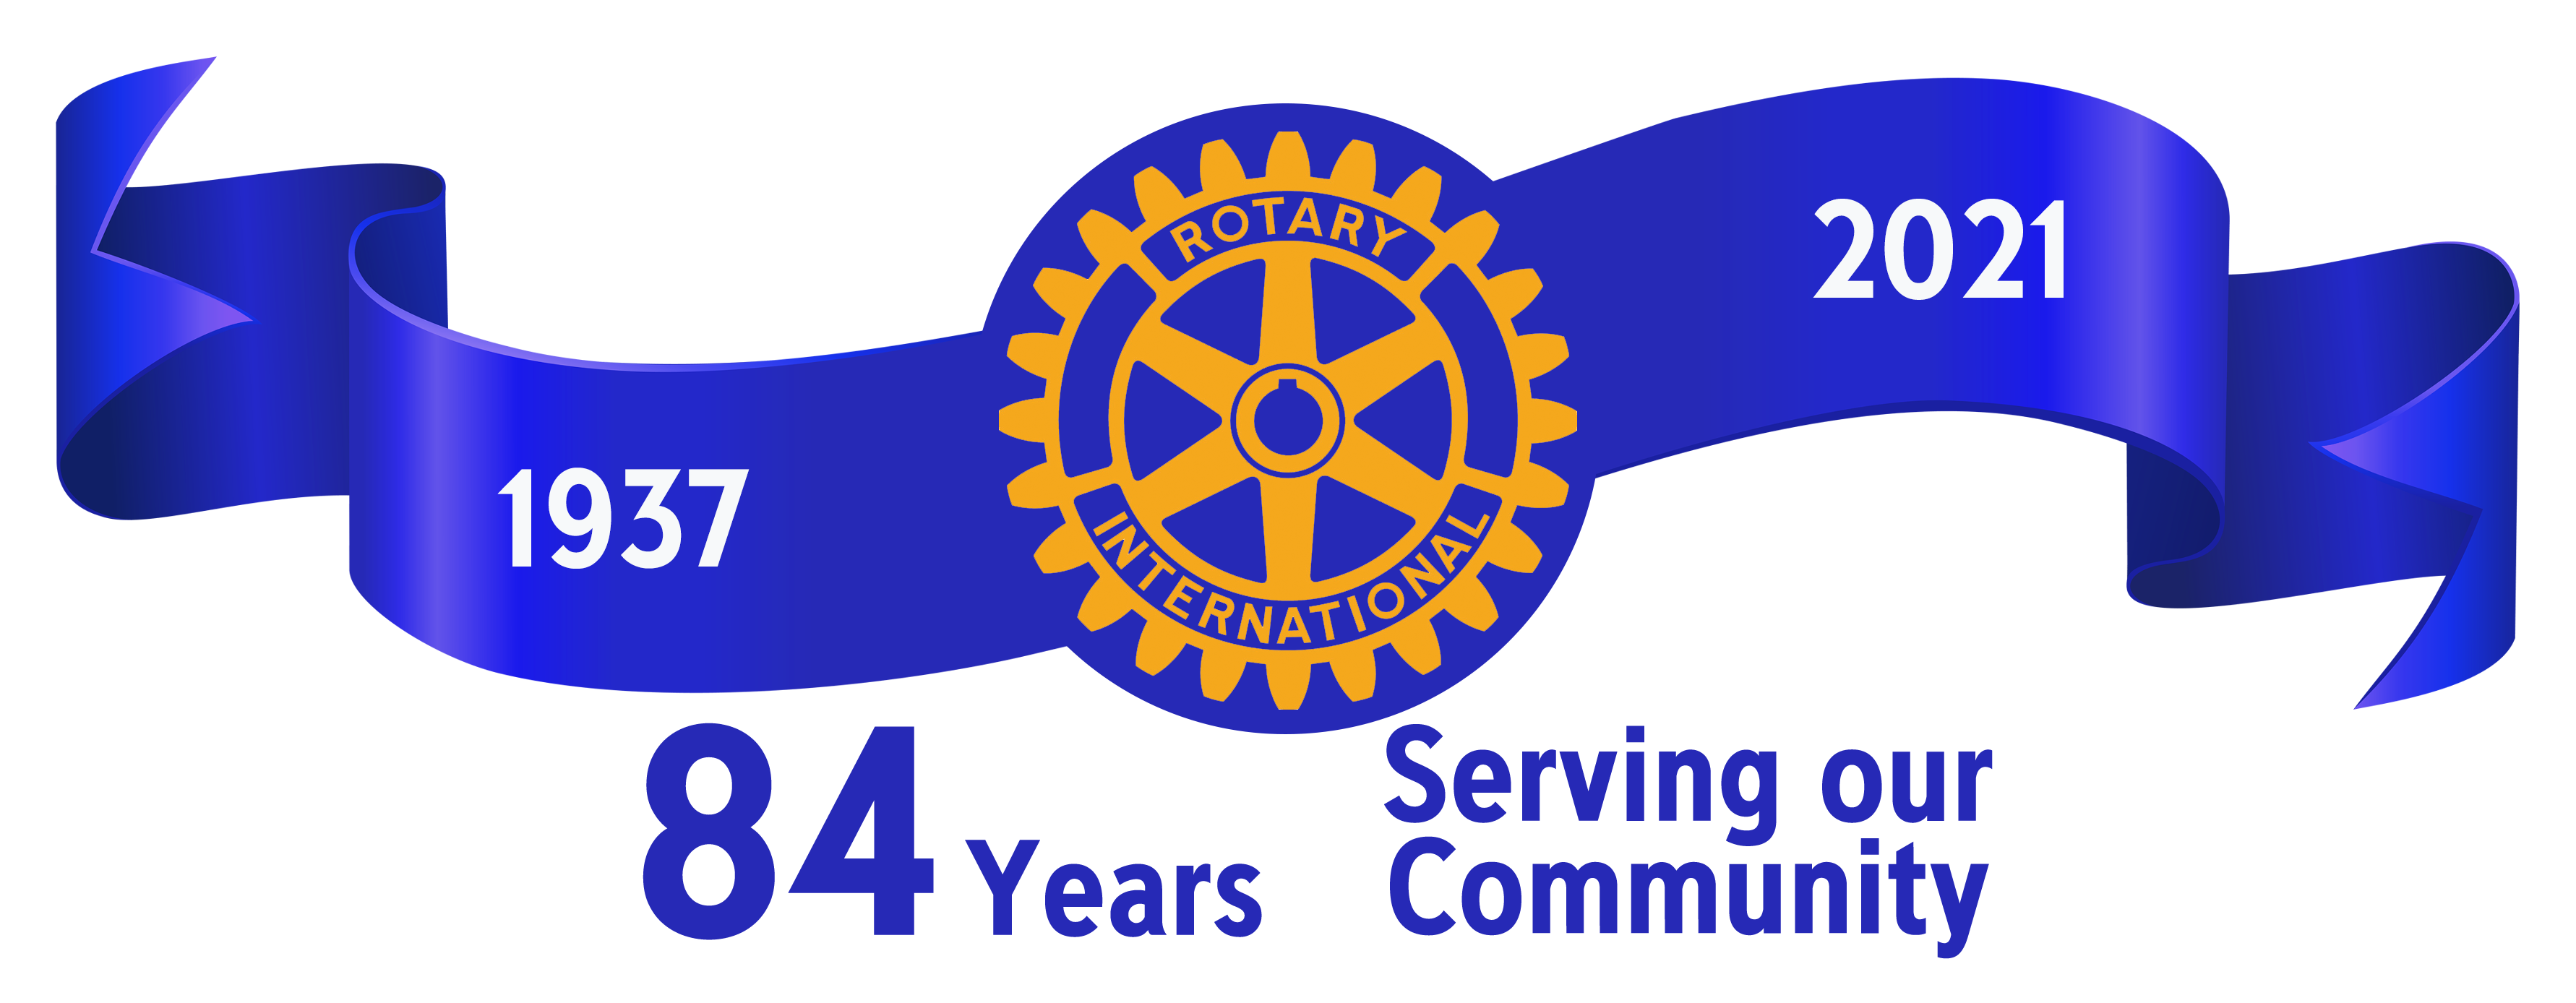 RCO 1937 to 2021. 84 Years serving our community.